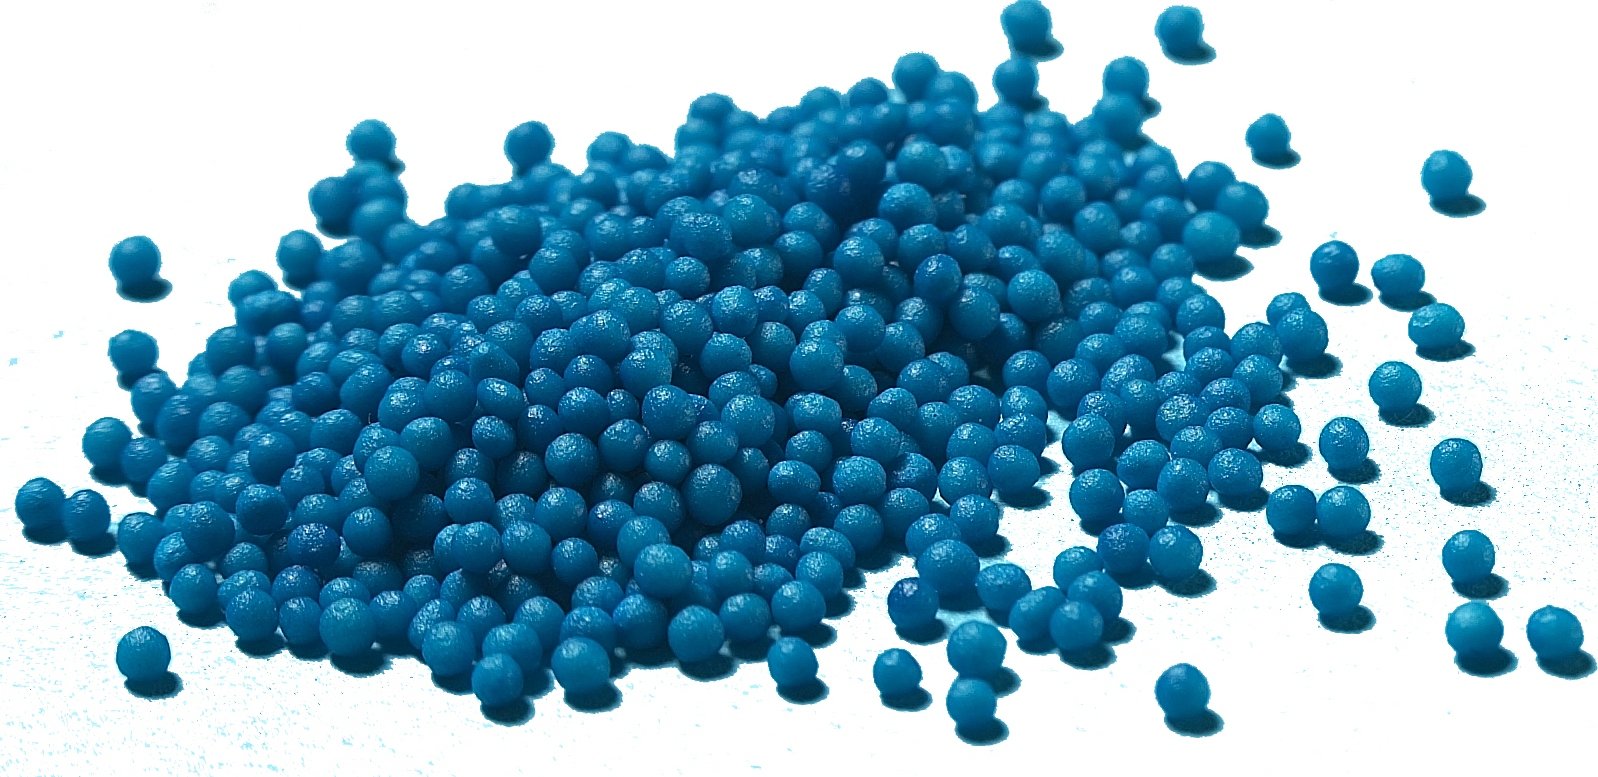 Spheroids or pellets produced with a Caleva laboratory spheronizer